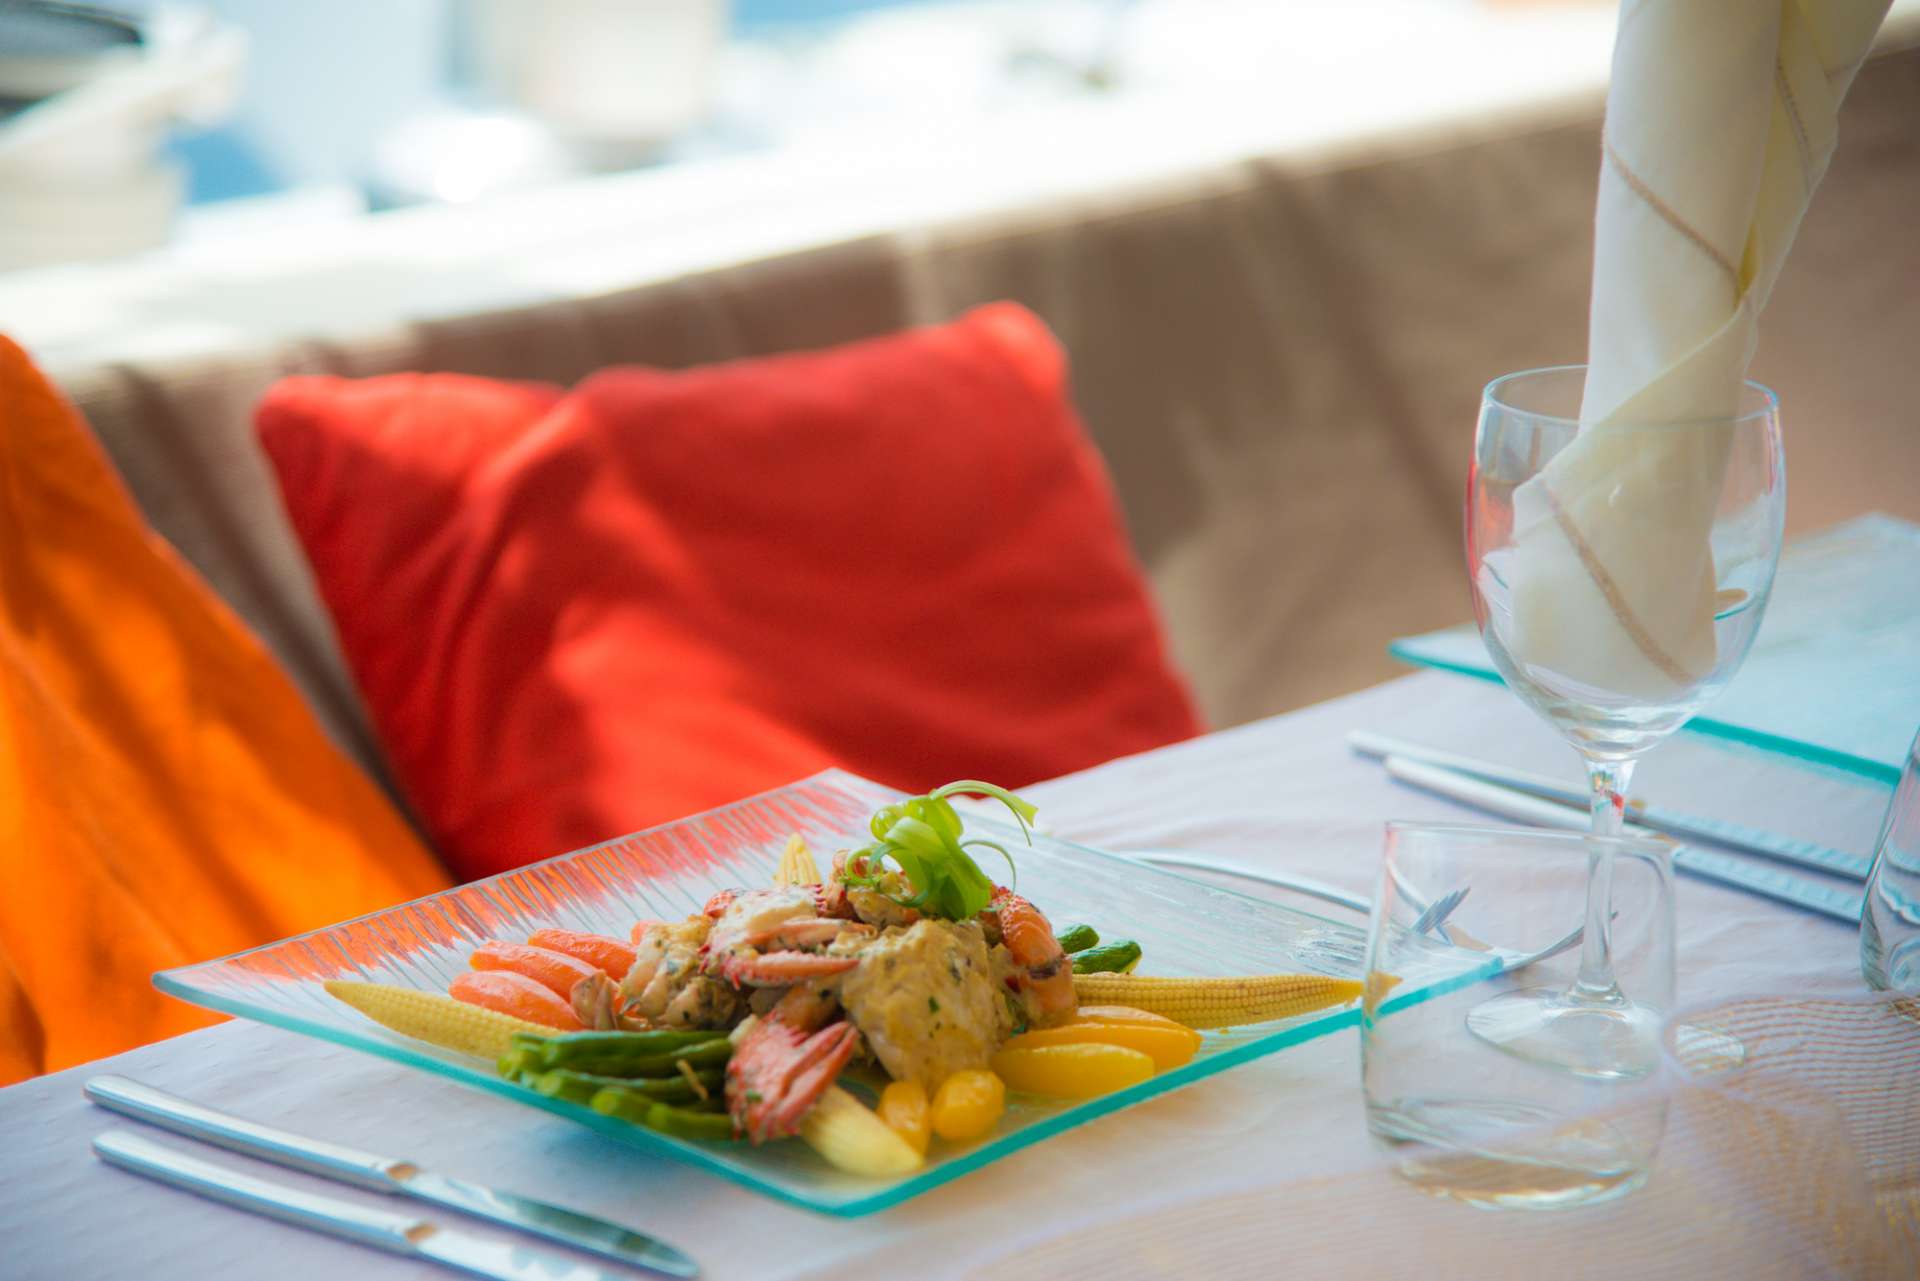 LONESTAR Yacht Charter - Delicious and healthy menus on board